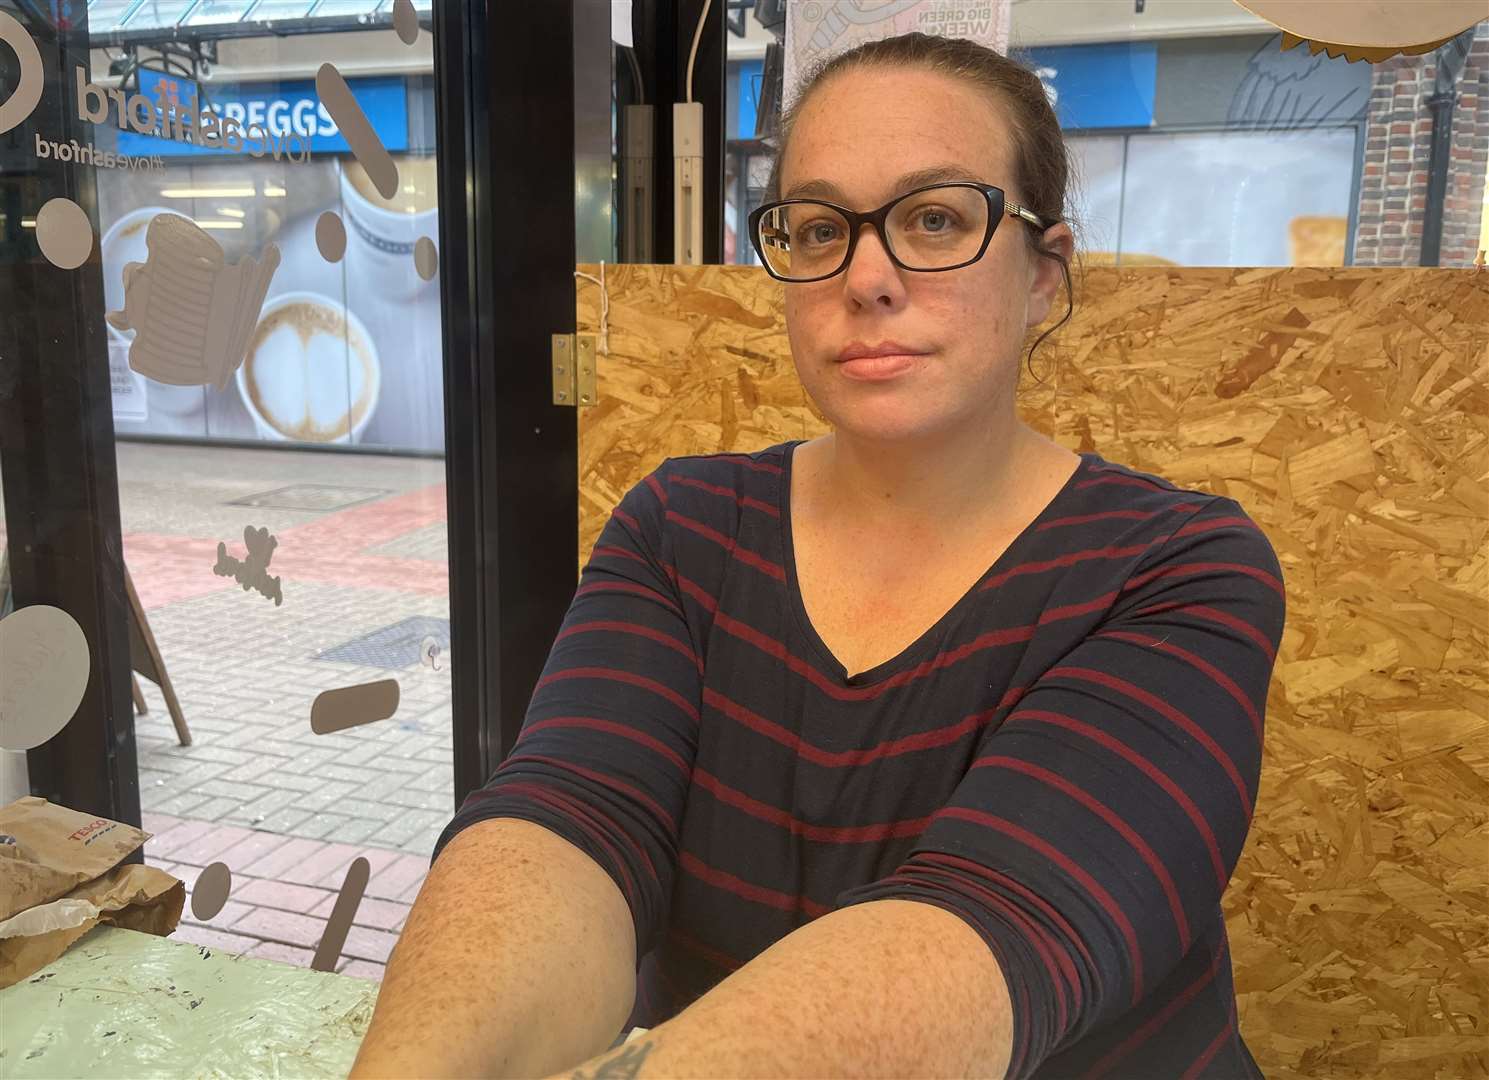 Made in Ashford's Zoe Everall says pigeons and seagulls should be left to their own devices